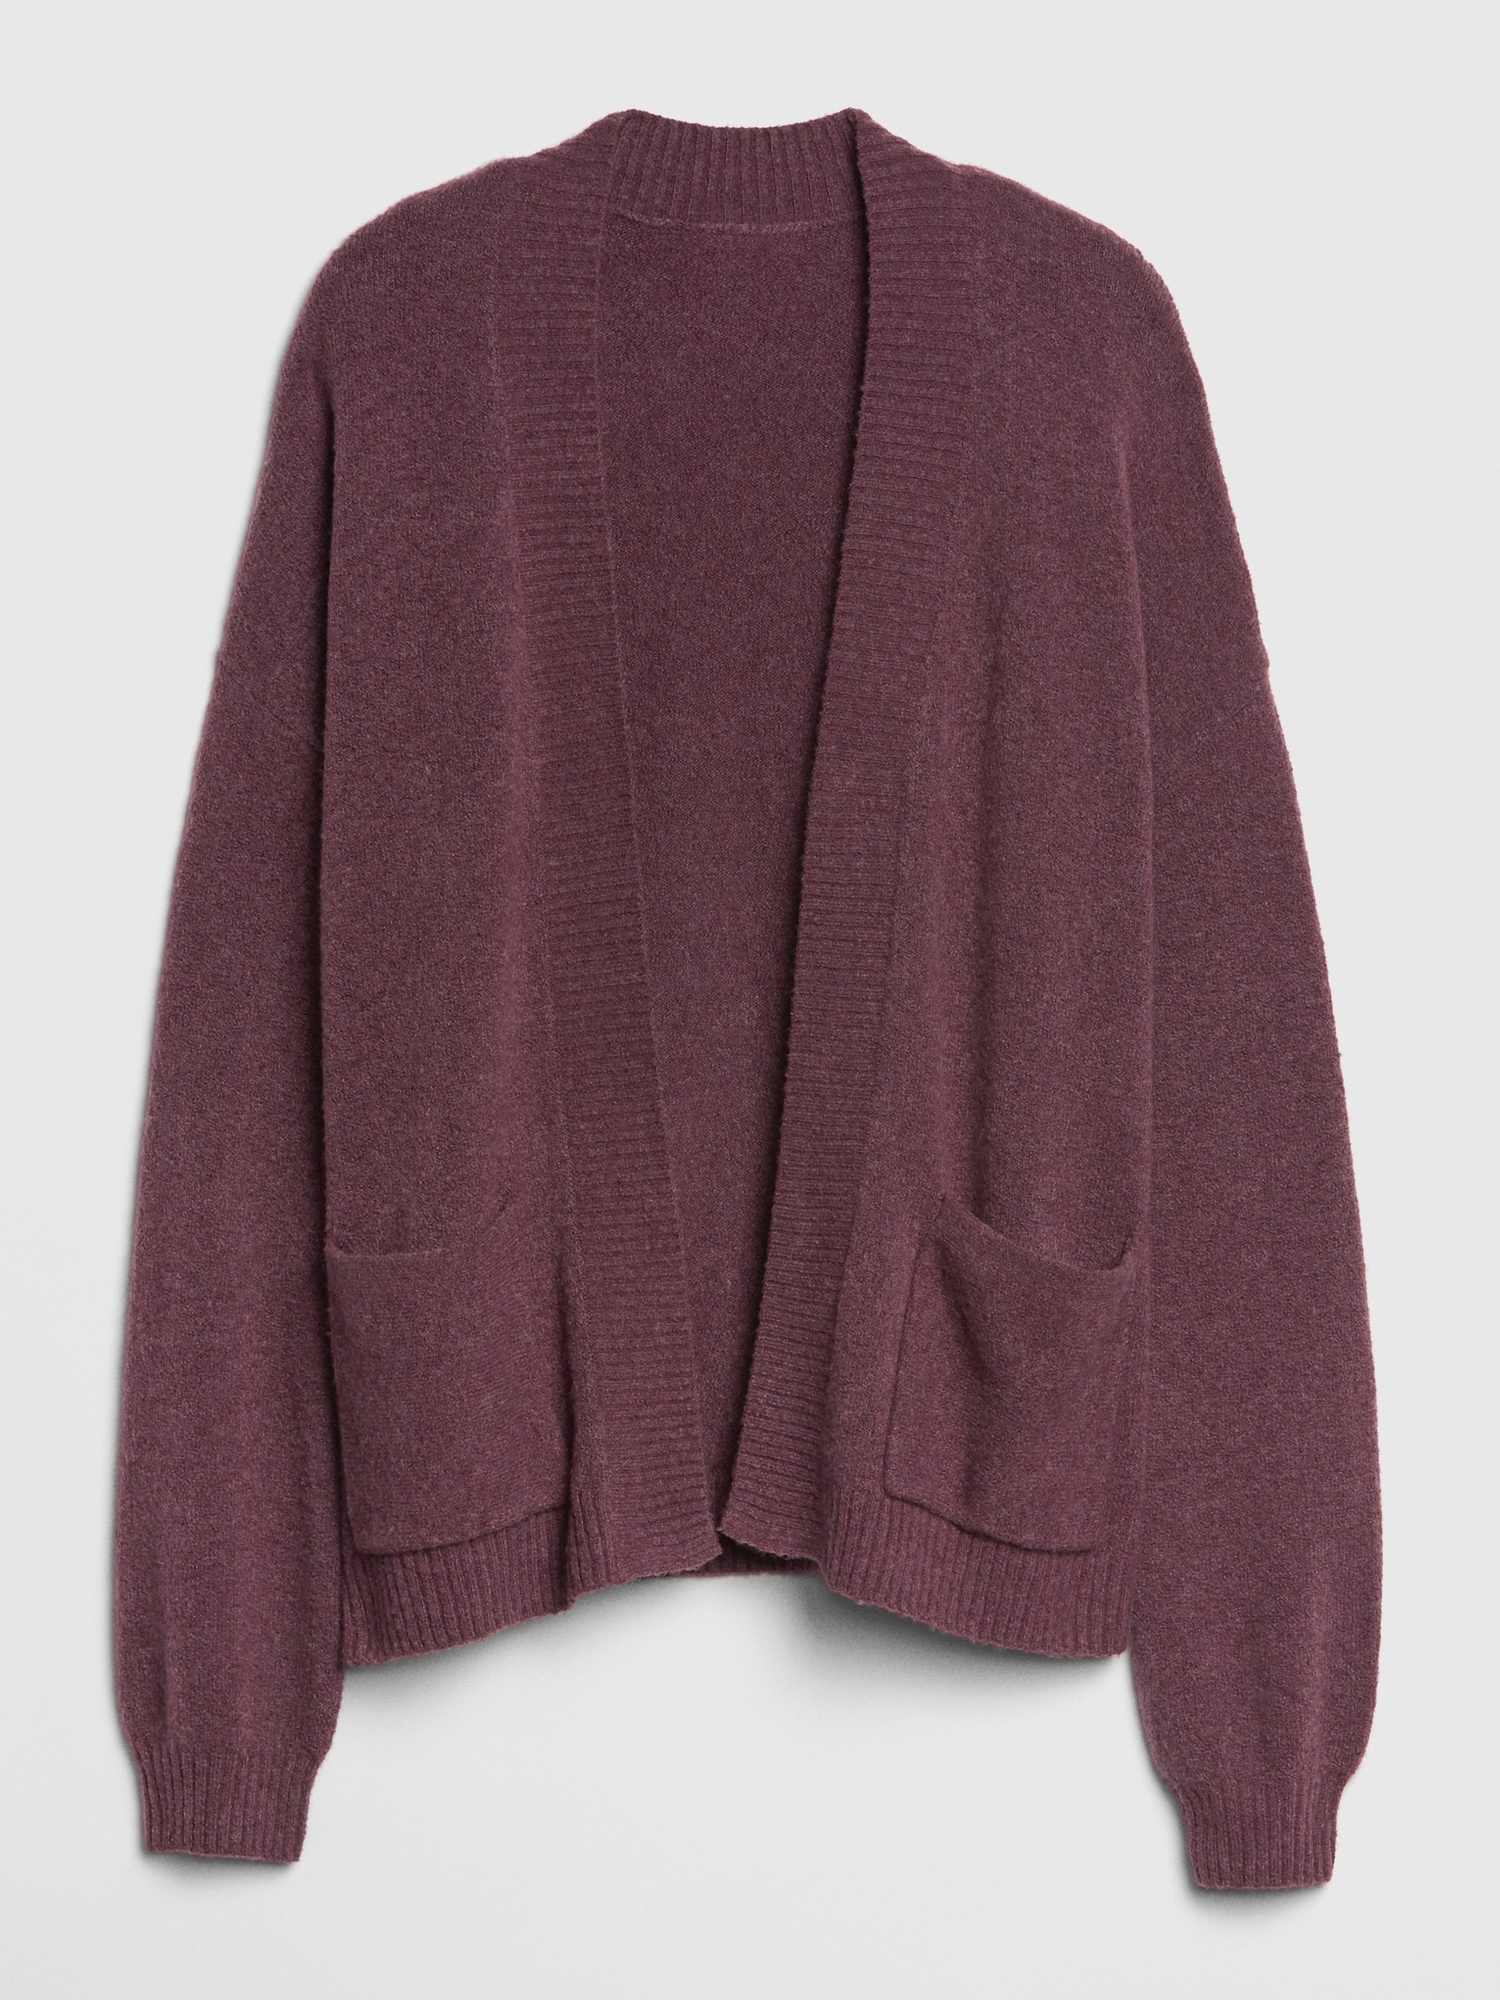 Relaxed Open-Front Cardigan Sweater